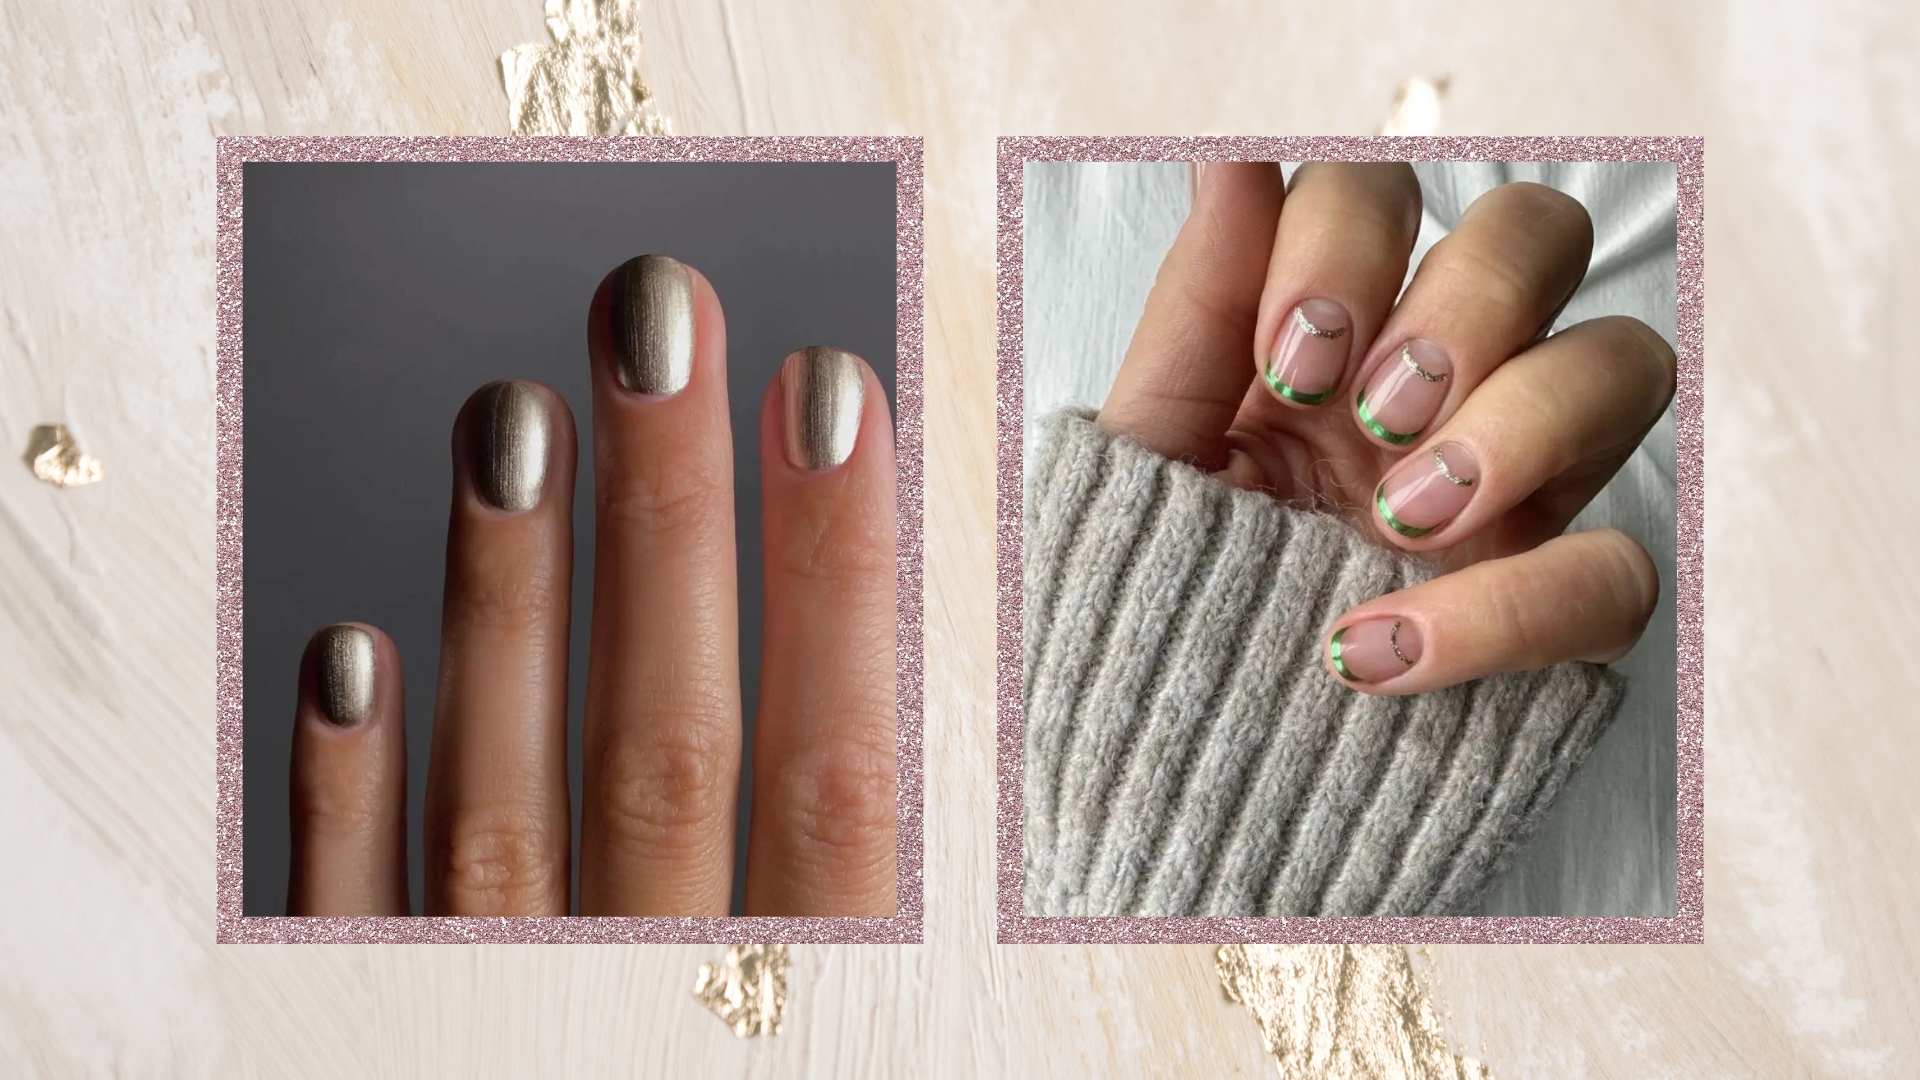 Our Top 5 New Year's Eve Nail Colors - Nail Color Inspo - Essie